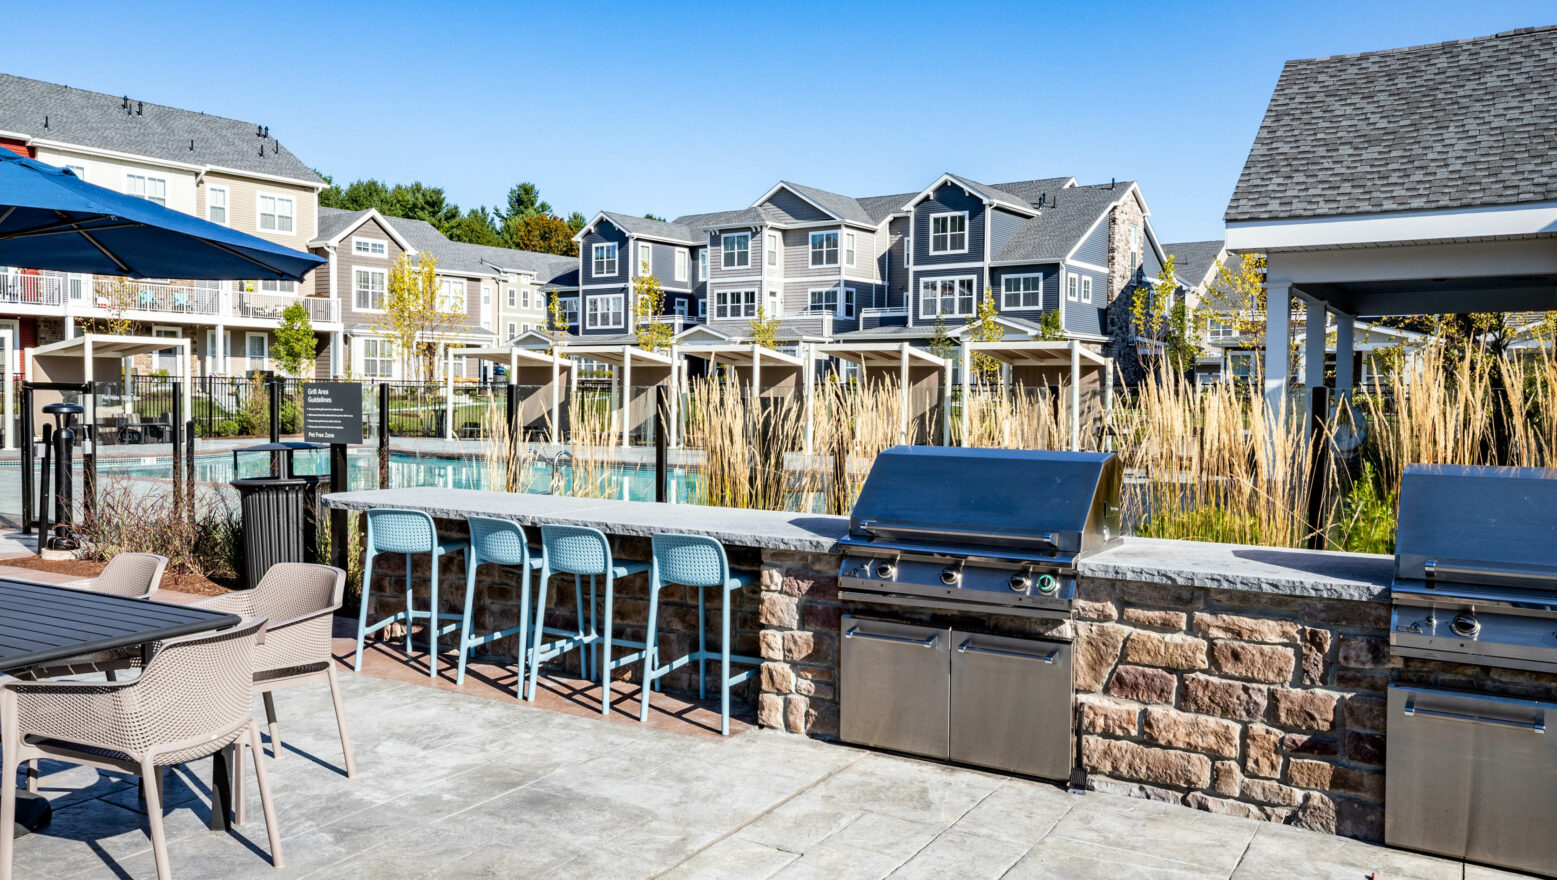 Outside BBQ and stools by a pool.